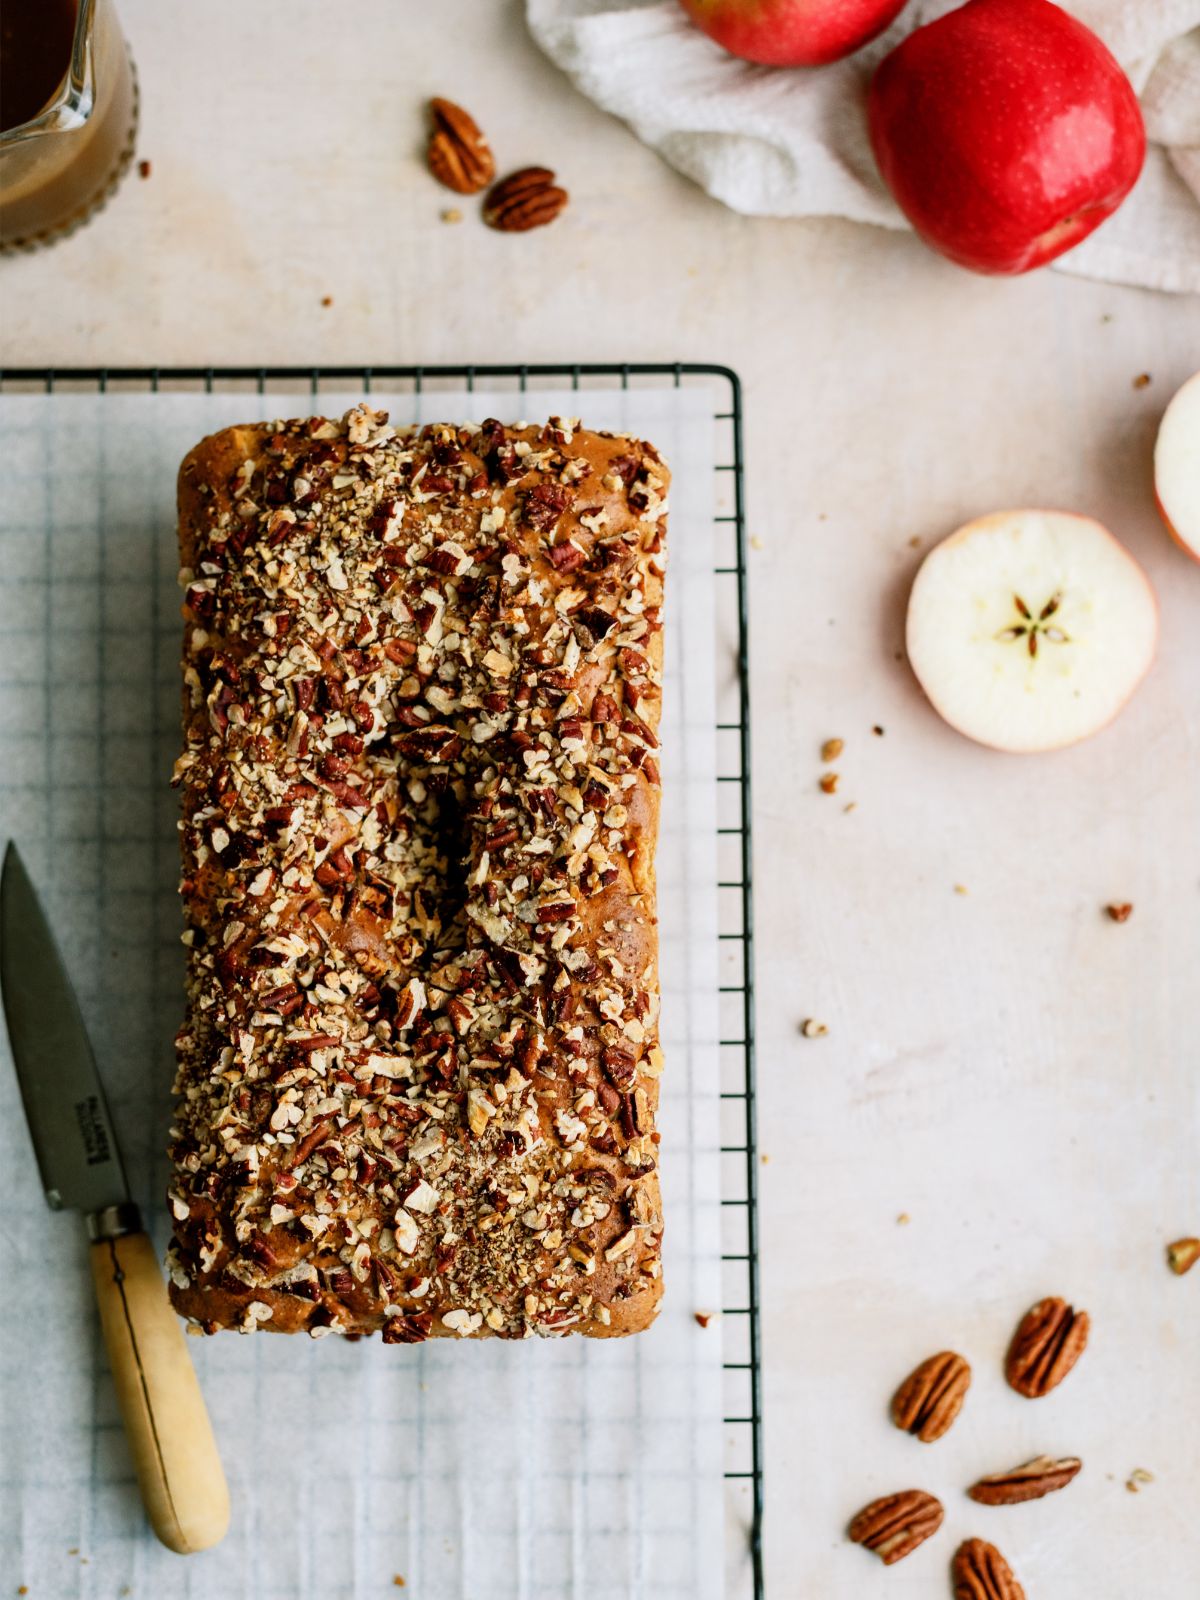 Baked Apple Praline Bread without the sauce on top